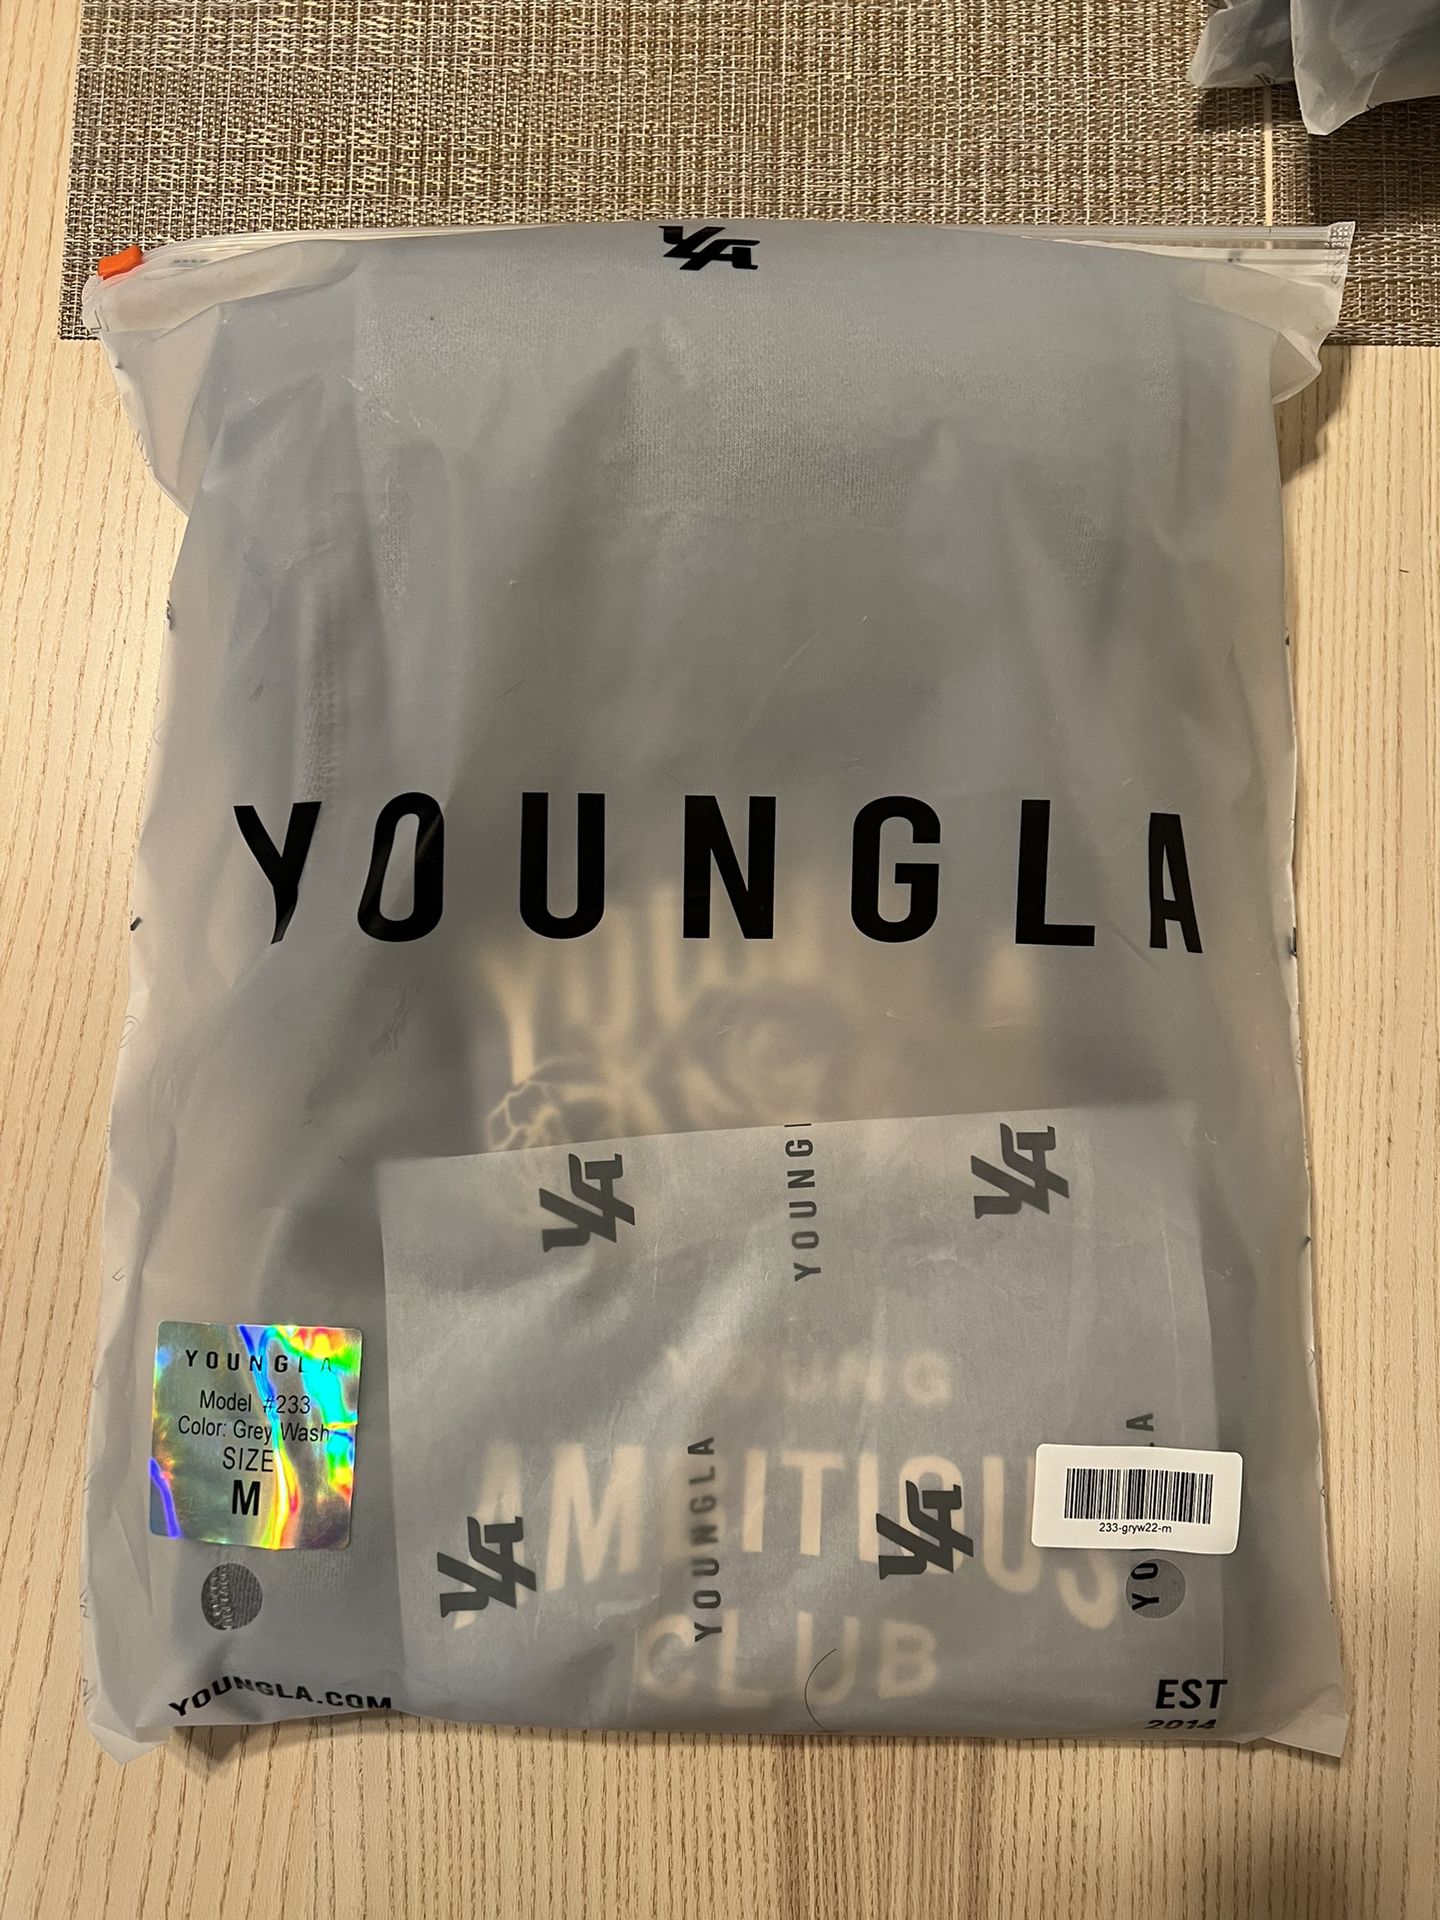 Young LA YLA Immortal Joggers for Sale in Irvine, CA - OfferUp